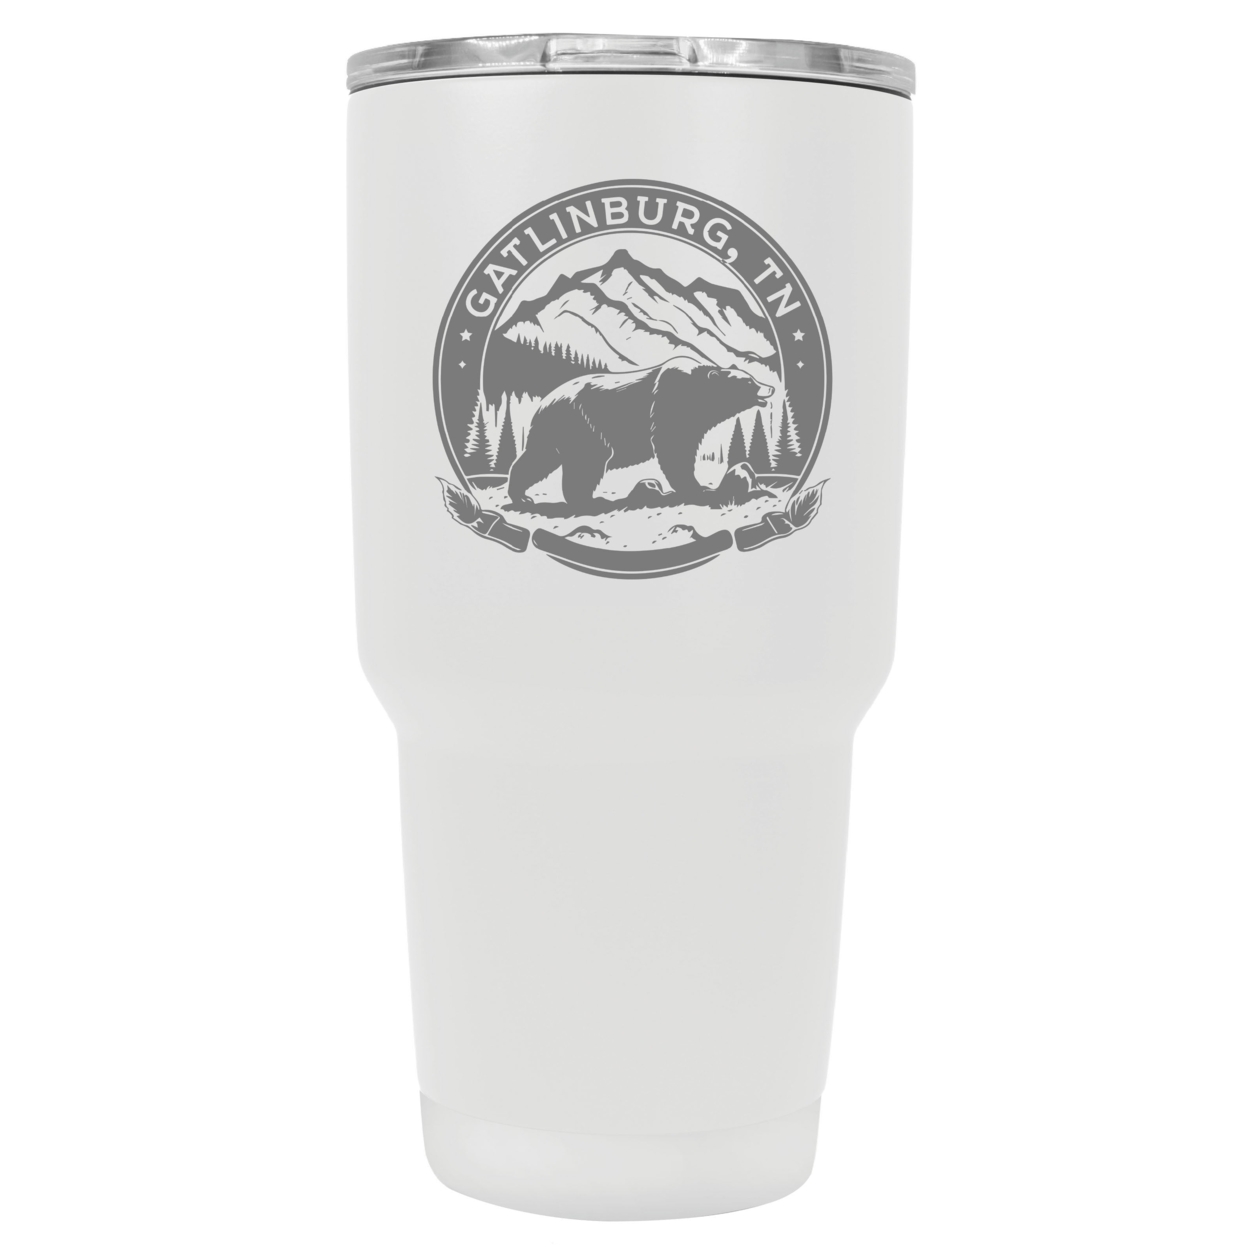 Gatlinburg Tennessee Laser Etched Souvenir 24 Oz Insulated Stainless Steel Tumbler - White